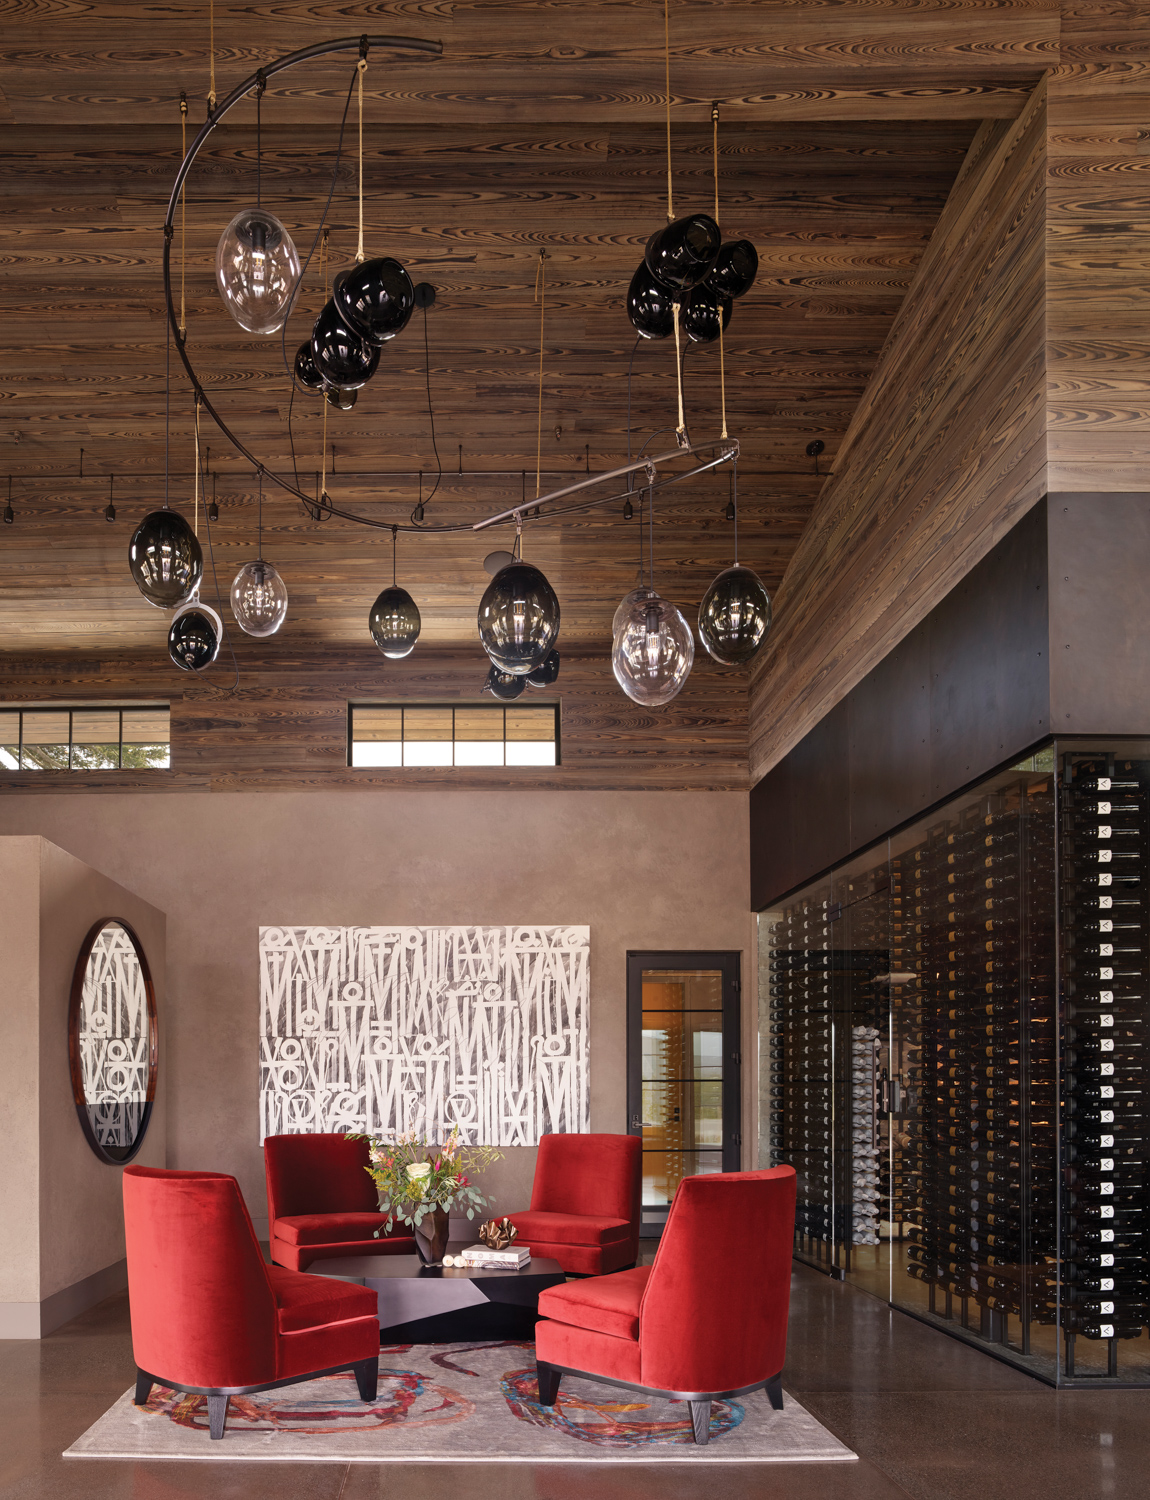 The interior of restaurant Base Camp features an intimate seating area with red chairs.